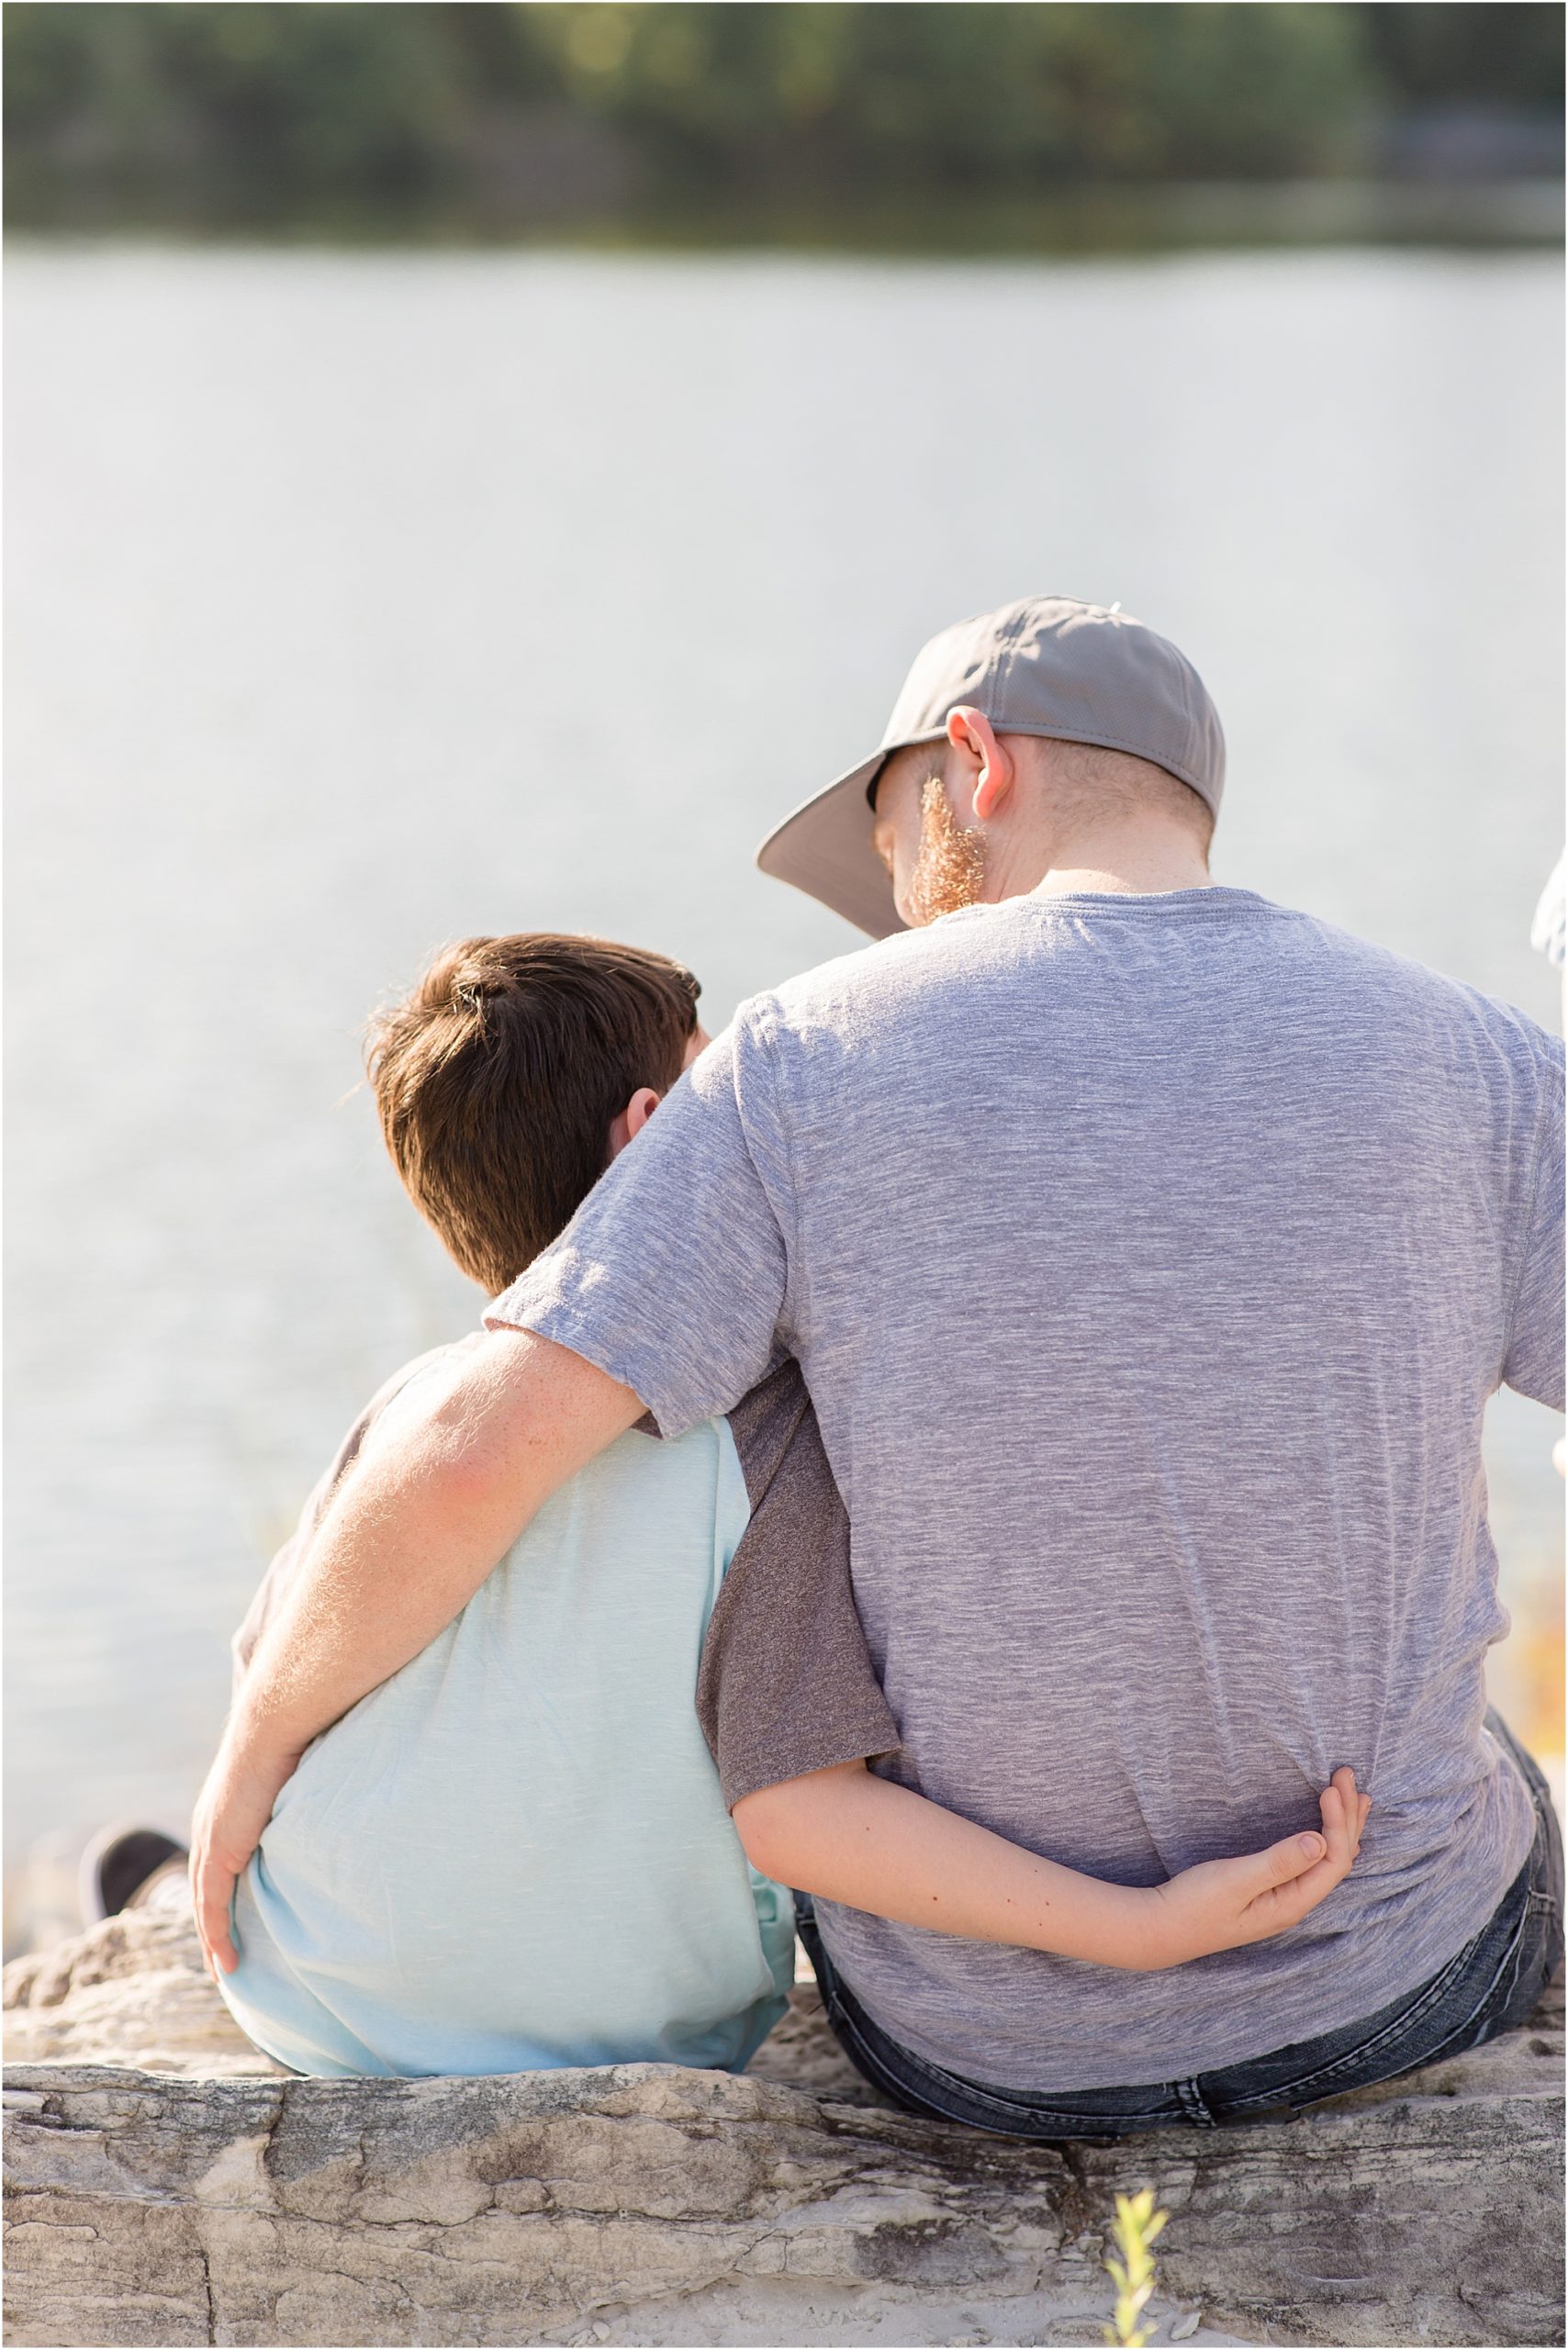 Father and son are seated on rock just in front of a beautiful lake. Dad is wearing a blue shirt with a blue hat and blue jeans. Son is wearing a blue and brown jersey style shirt and jeans shorts. 